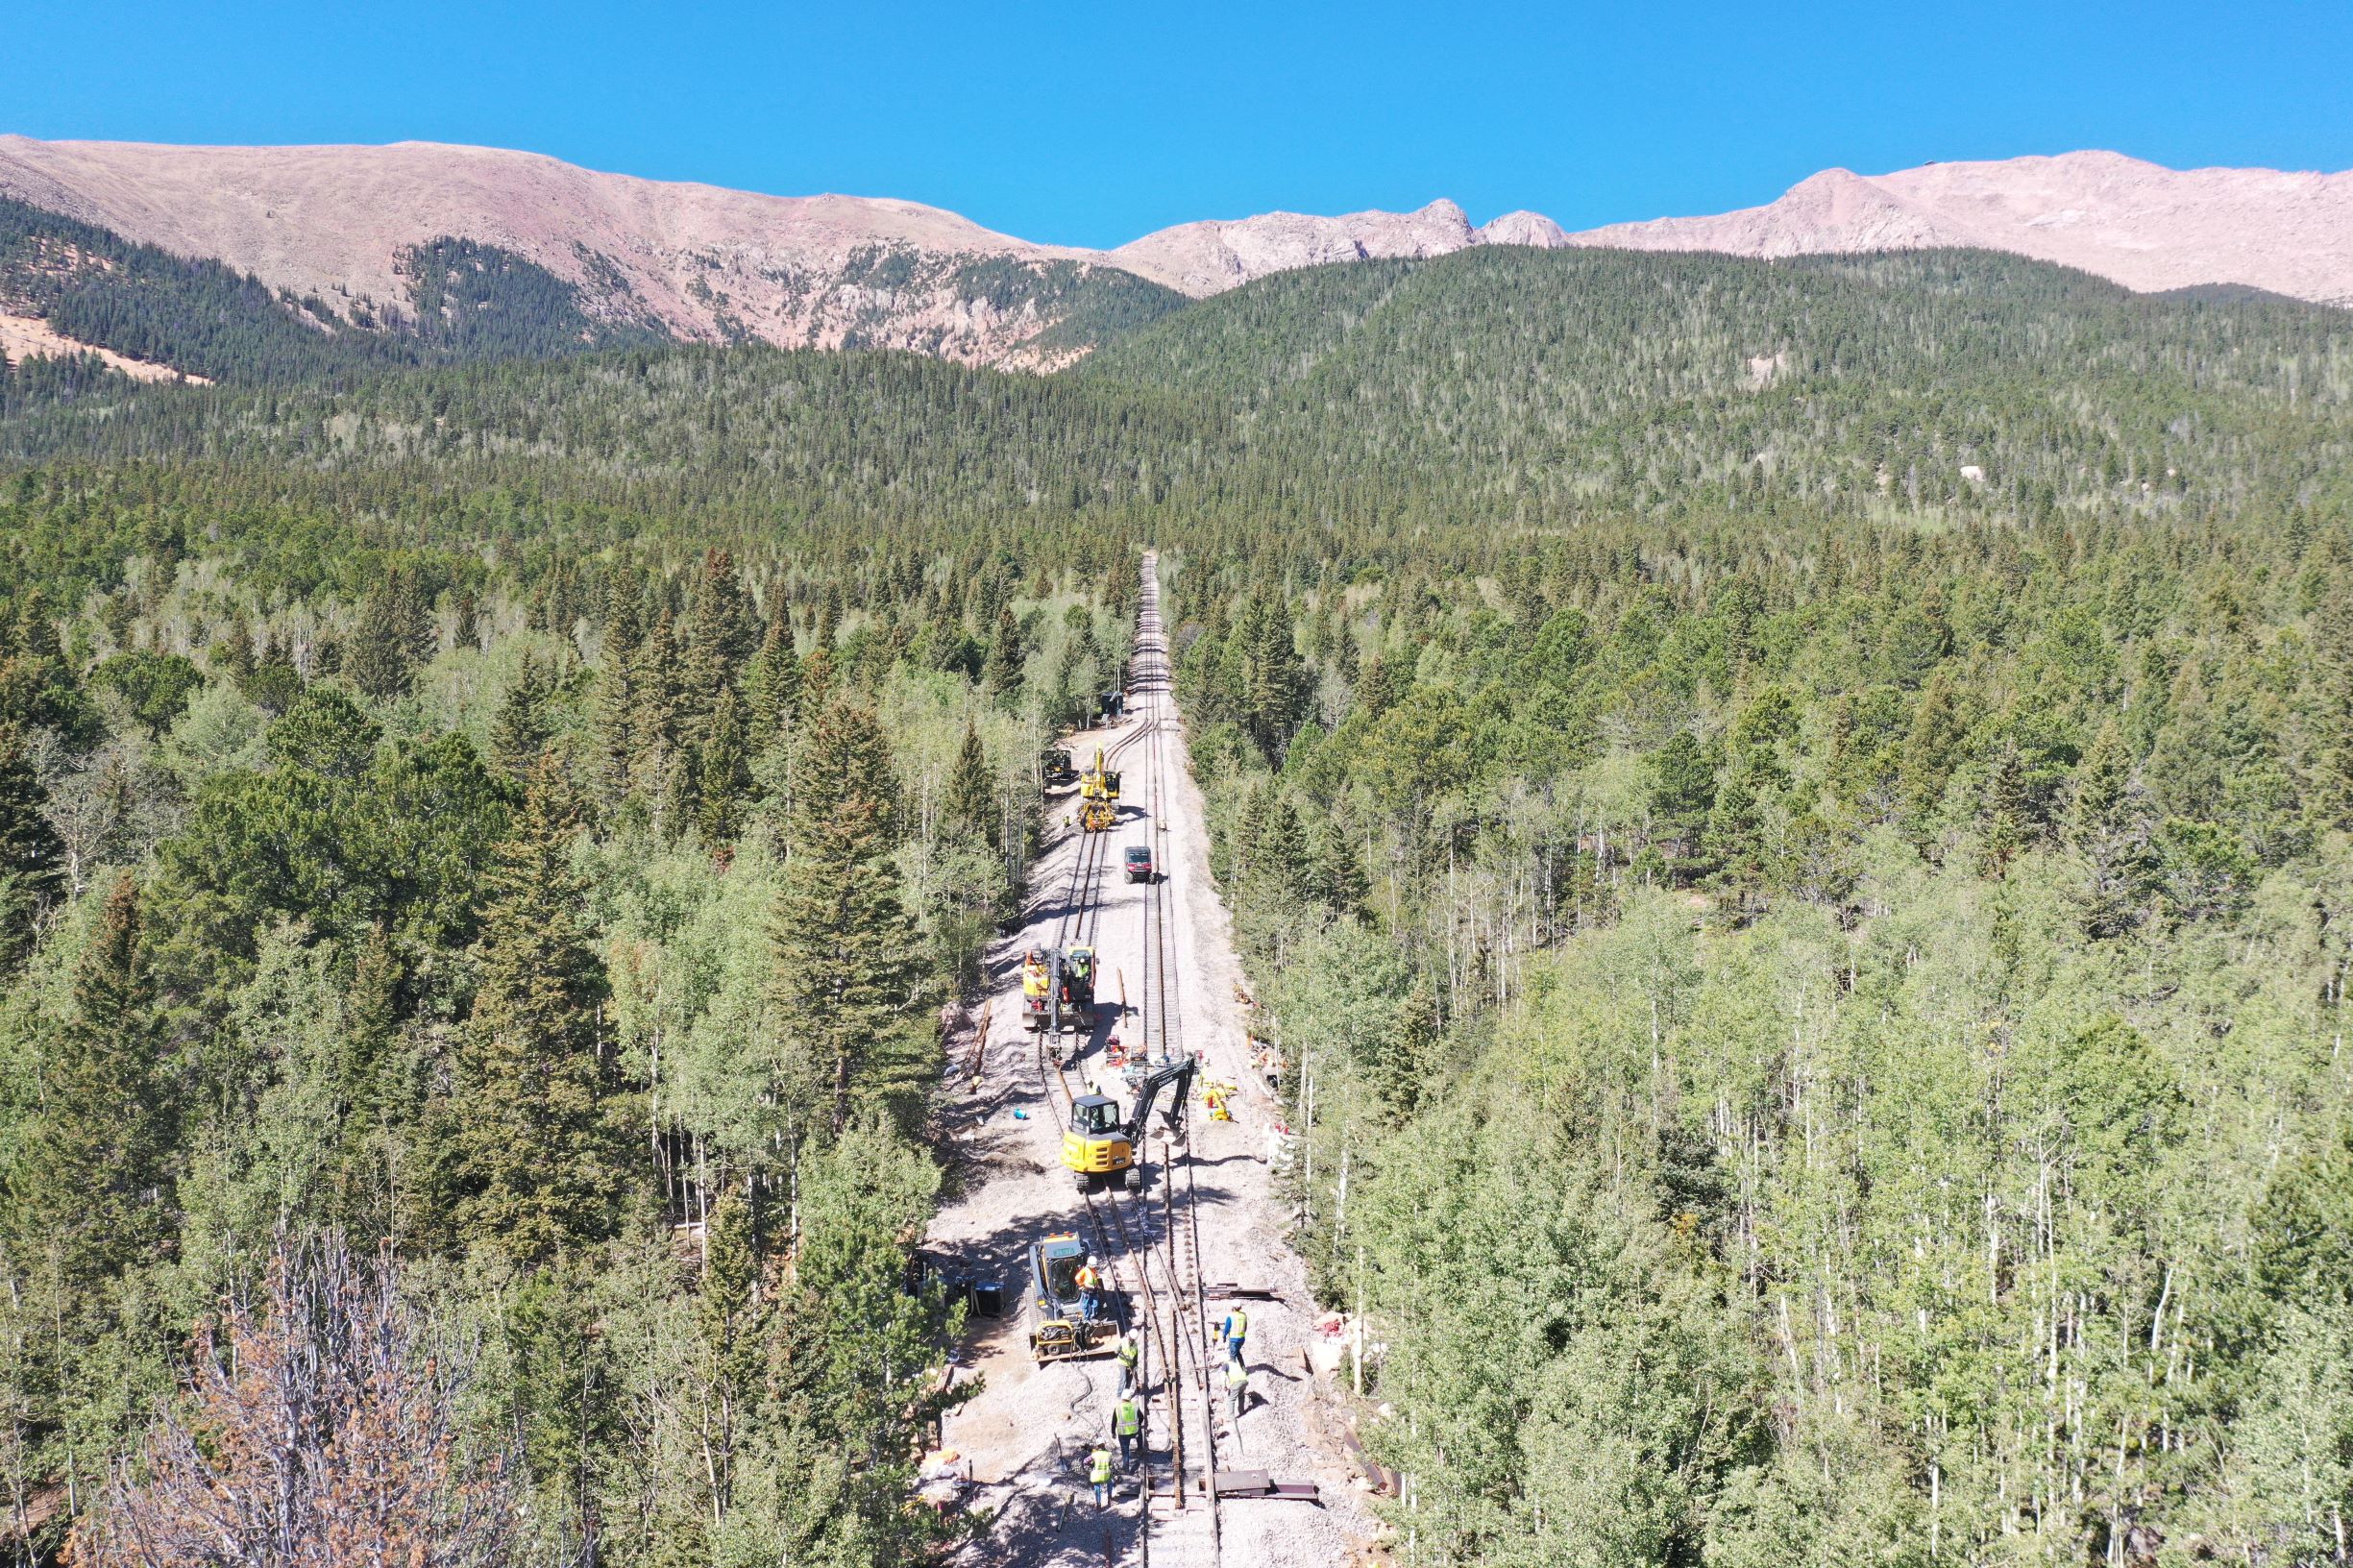 Track renovations on The Broadmoor Manitou and Pikes Peak Cog Railway